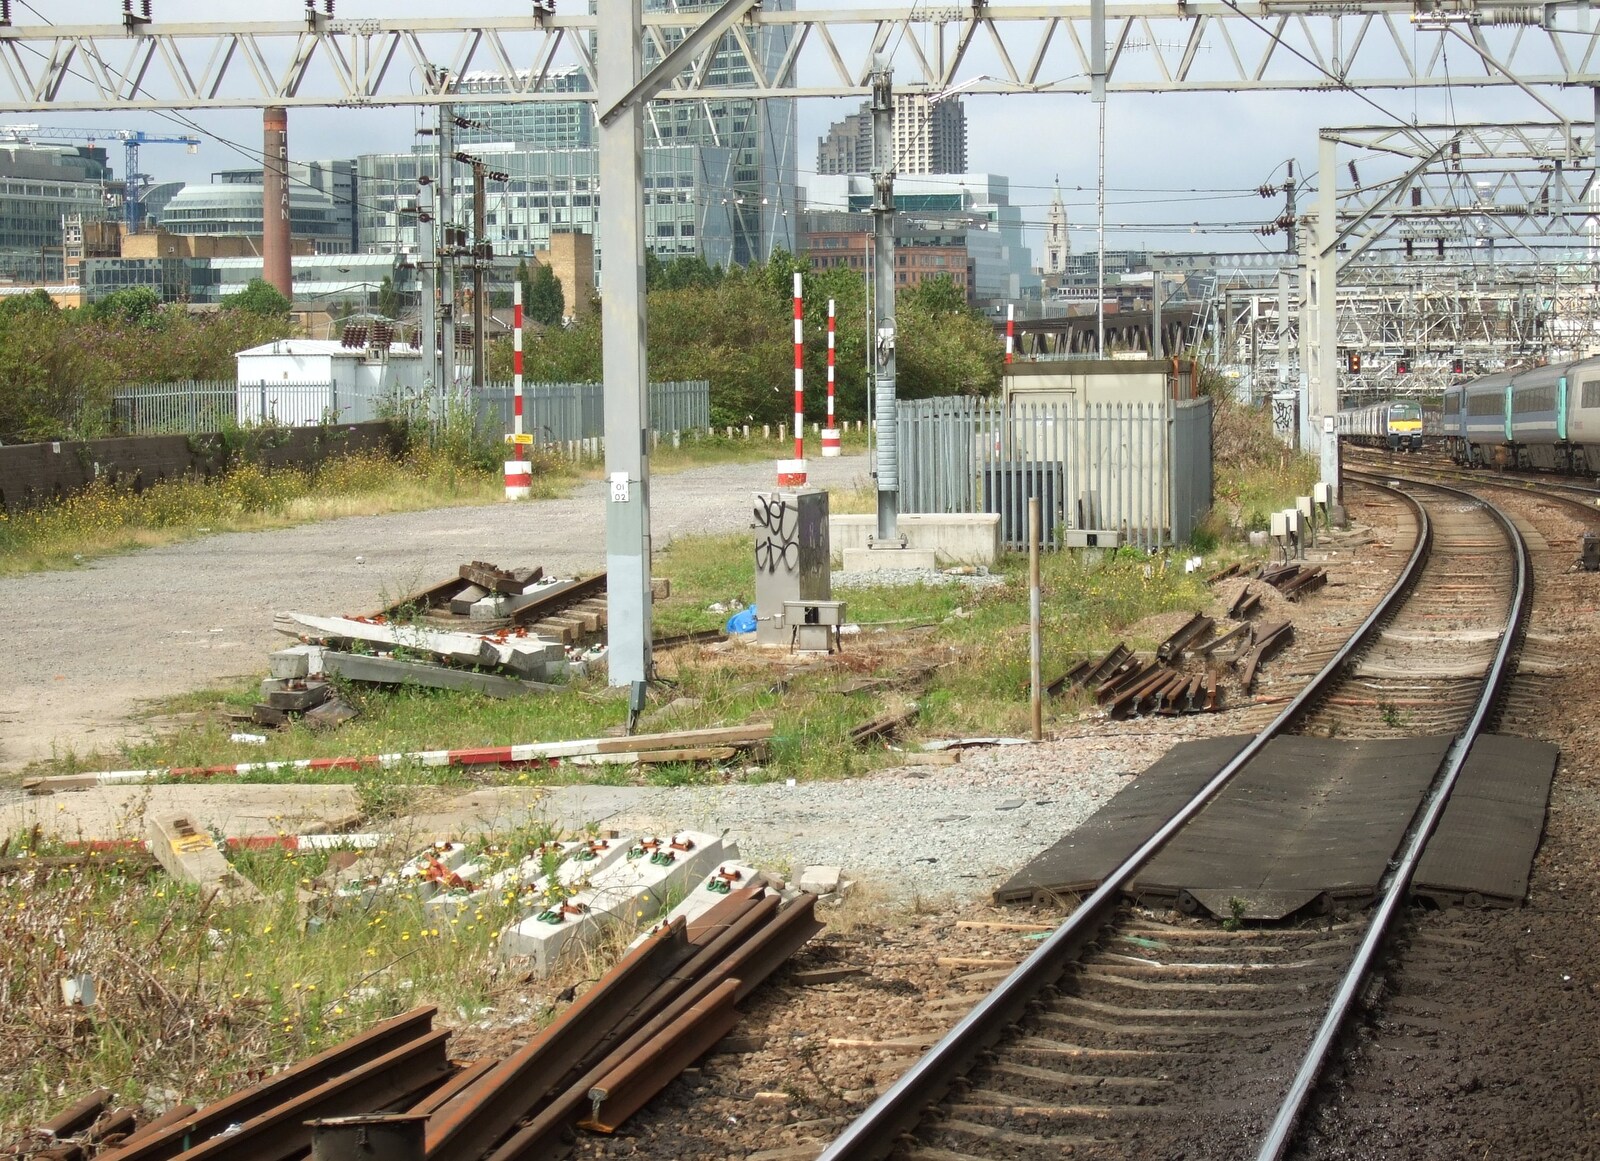 Piles of discarded track near Bethnal Green from On the Rails, and a Kebab, Stratford and Diss, Norfolk - 31st July 2011